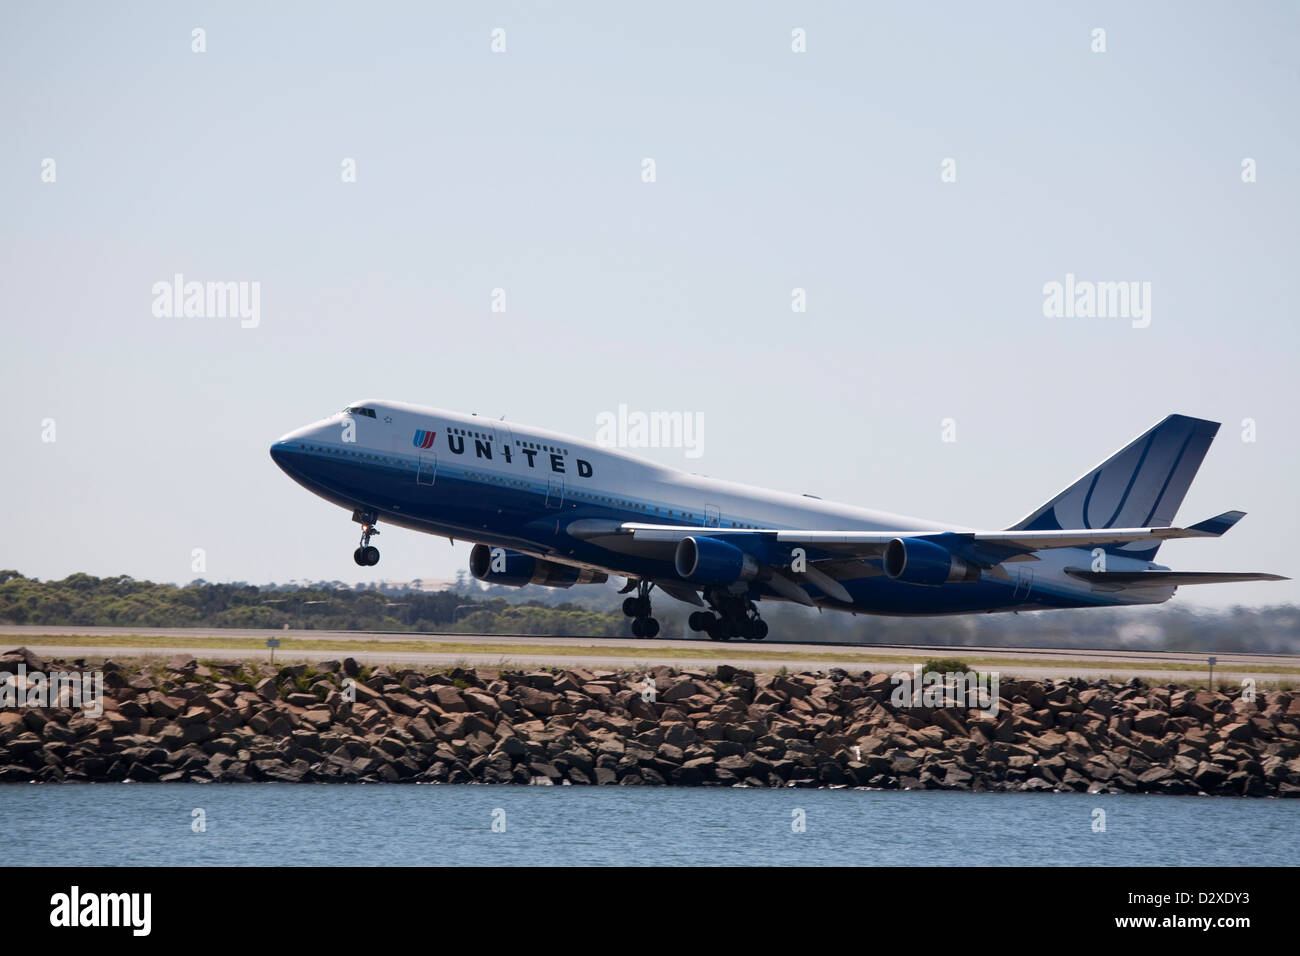 United airlines Jet Aircraft in takeoff mode from Kingsford Smith Airport Sydney Australia Stock Photo